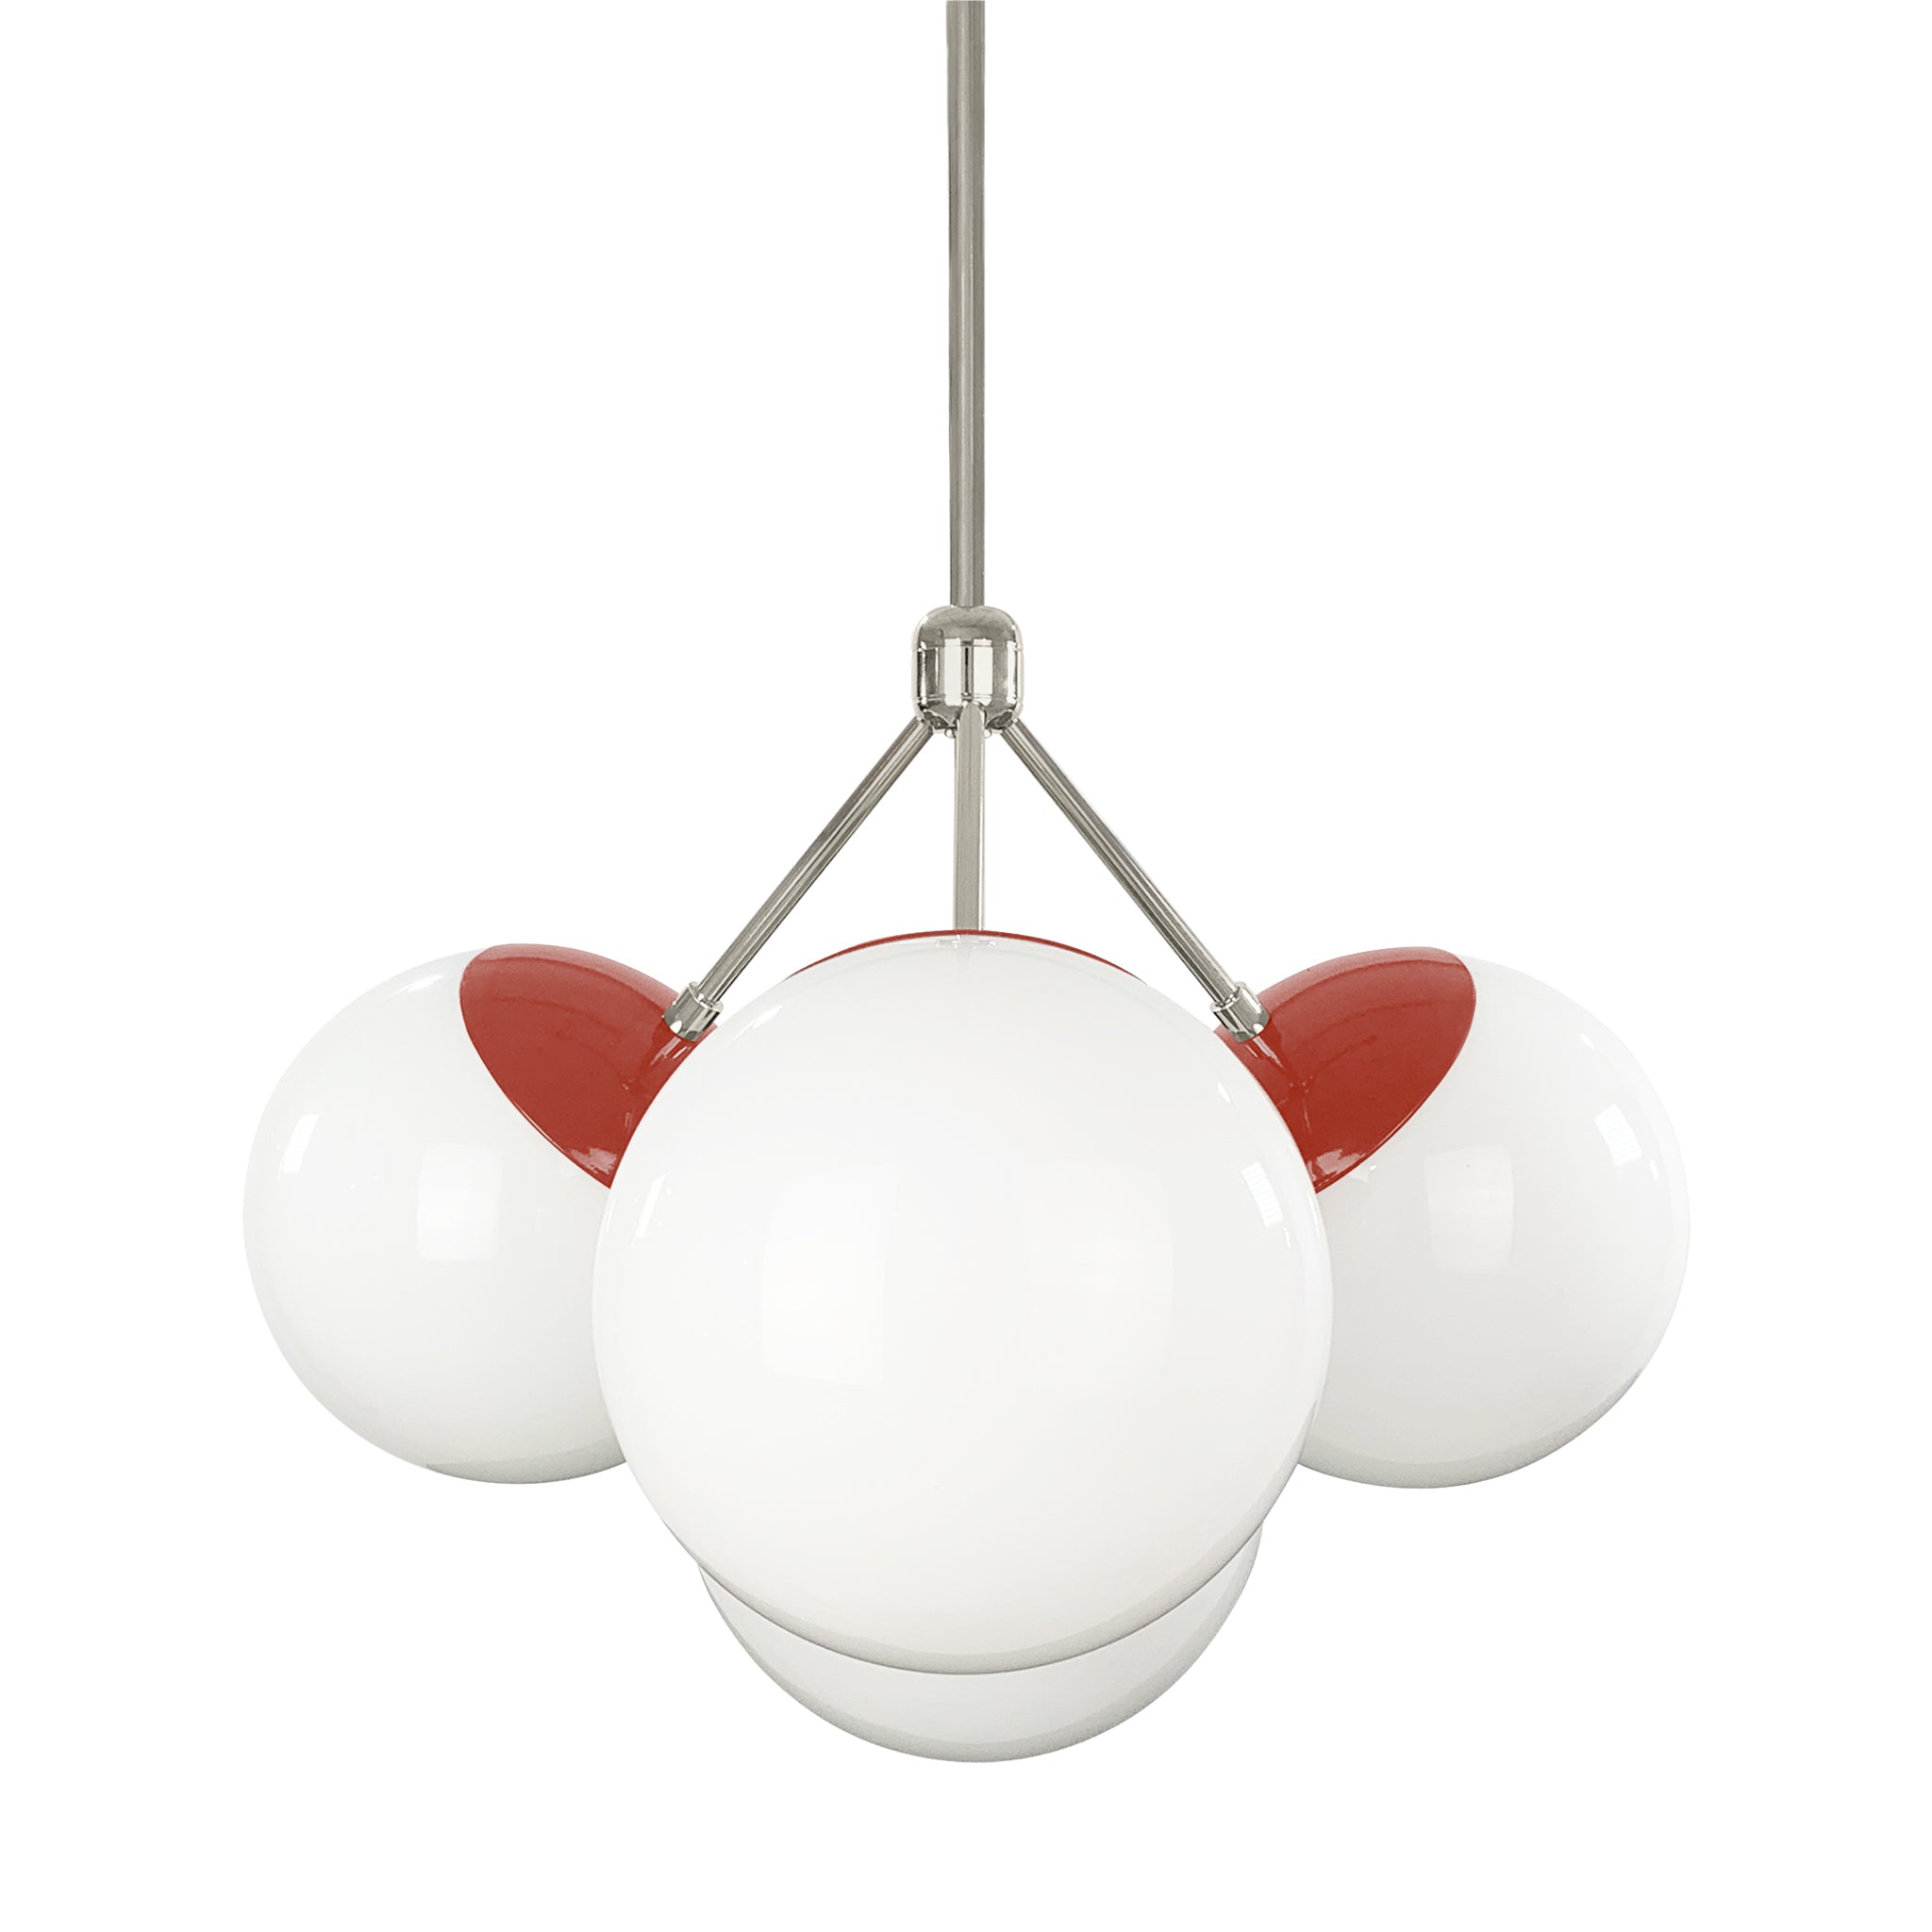 Nickel and riding hood red color Tetra chandelier Dutton Brown lighting